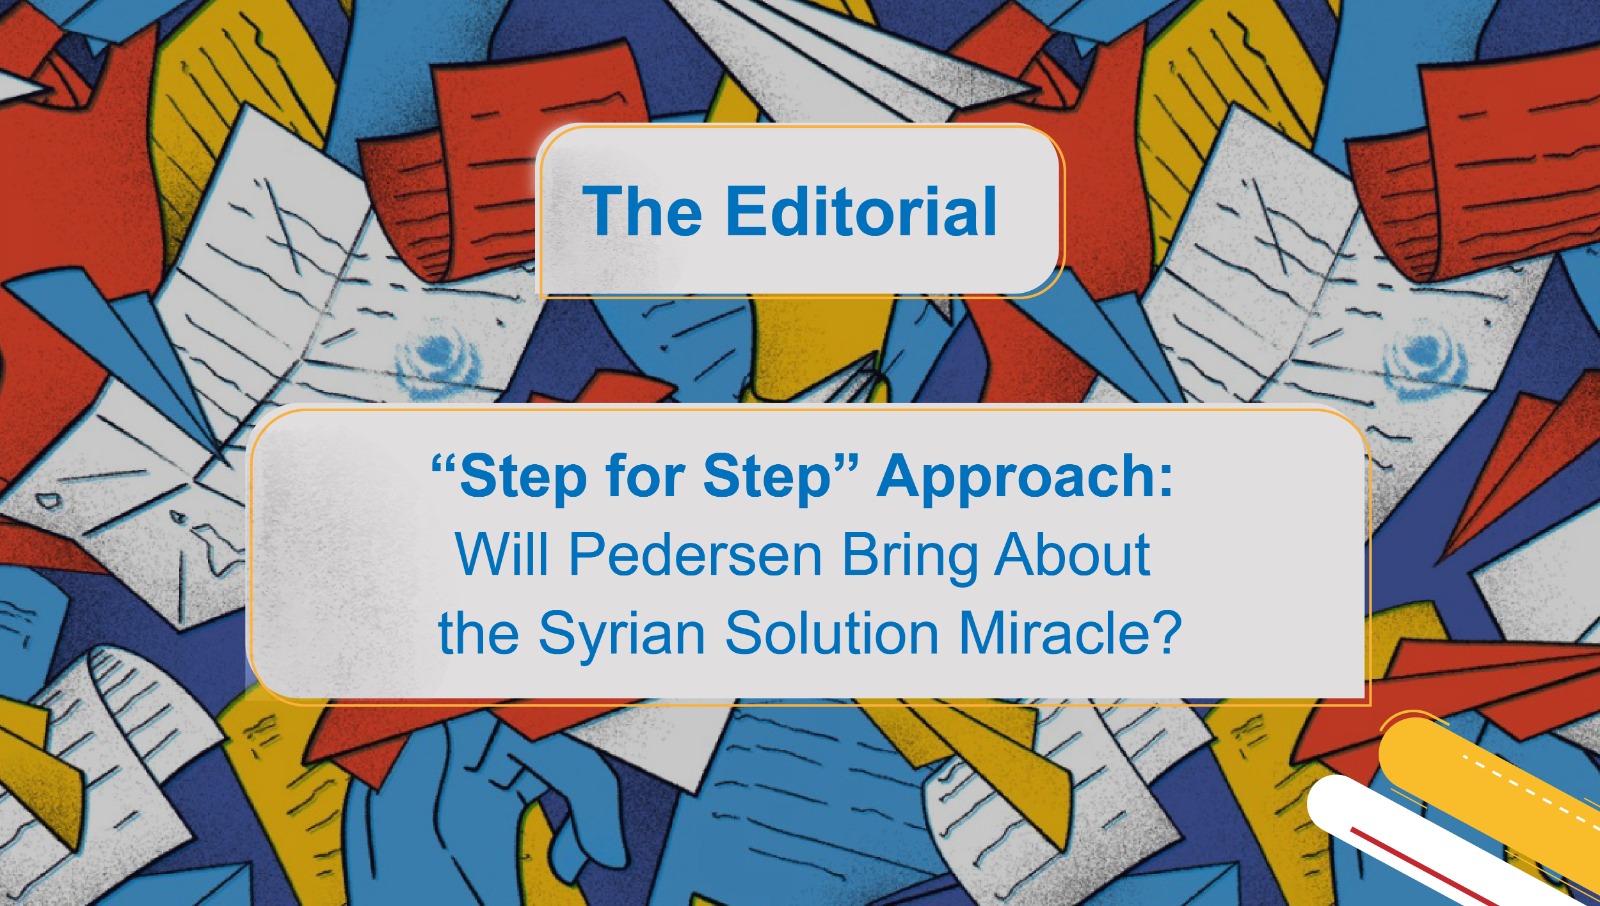 “Step for Step” Approach: Will Pedersen Bring About the Syrian Solution Miracle?